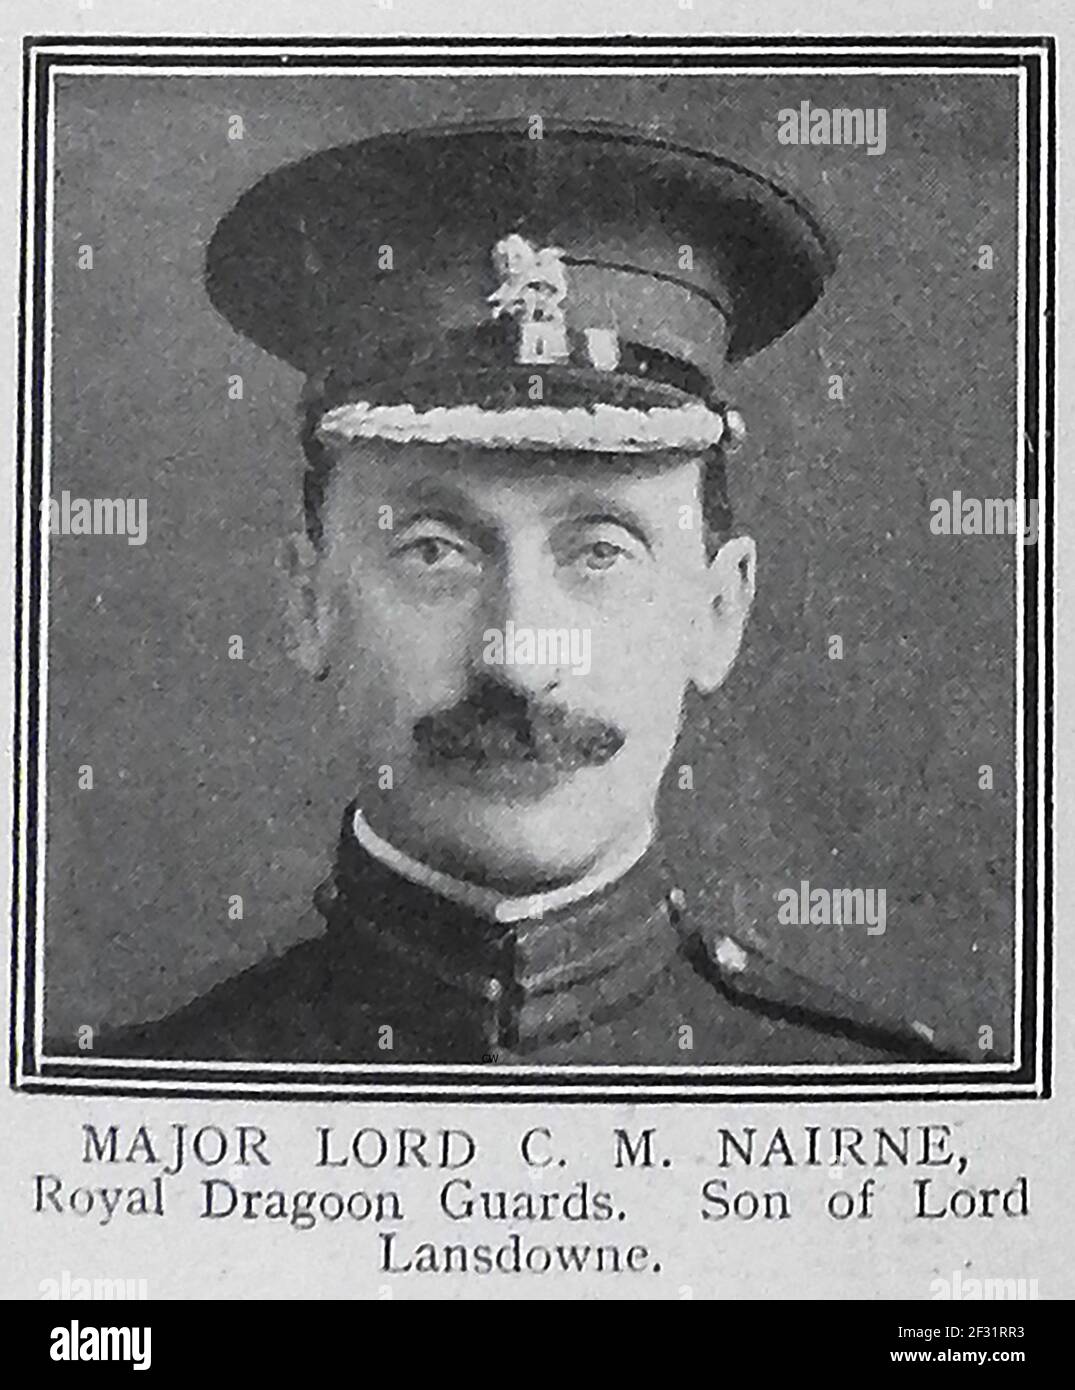 MAJOR  LORD C M NAIRNE of the Royal Guards (son of  Lord Landsdowne) -   A printed portrait from a 1914-1915 role of honour page of those killed in action in World War One. Stock Photo